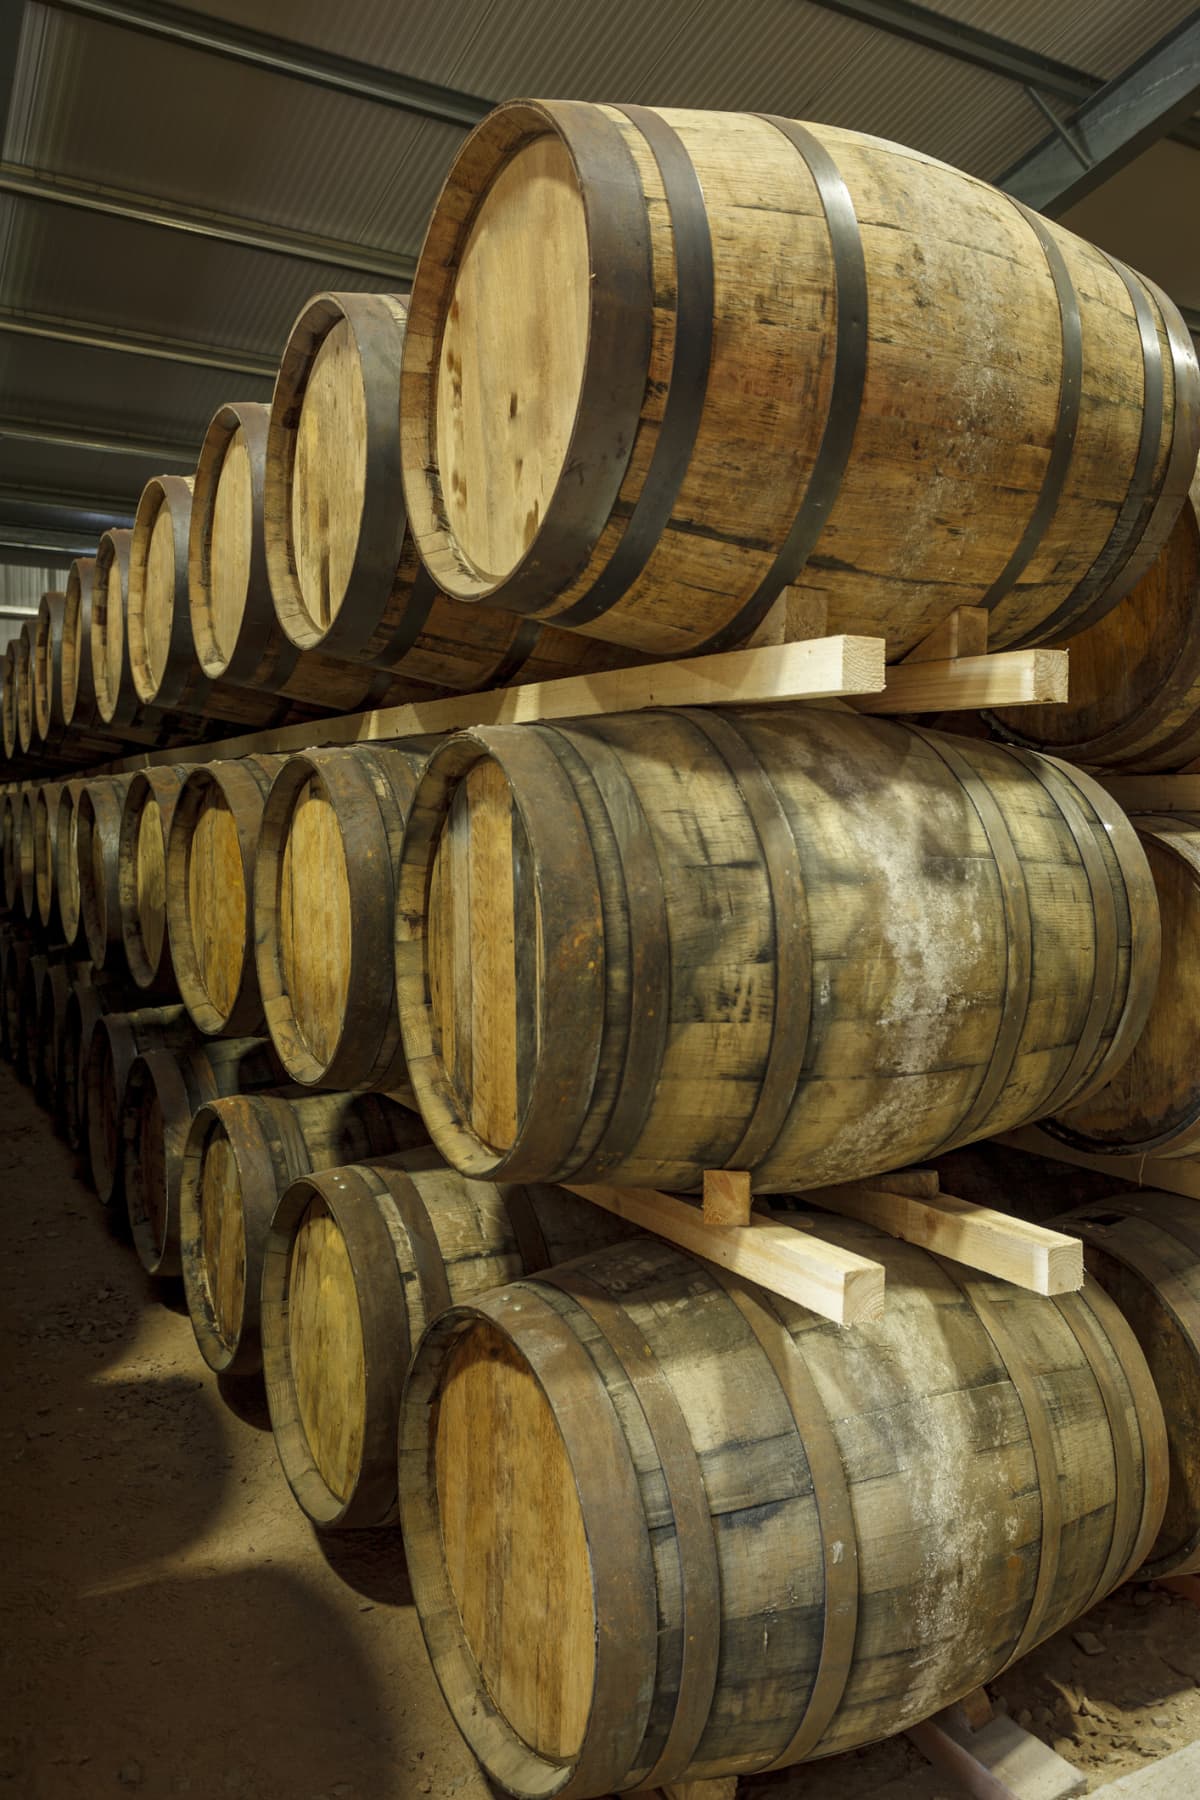 Whiskey barrels stacked